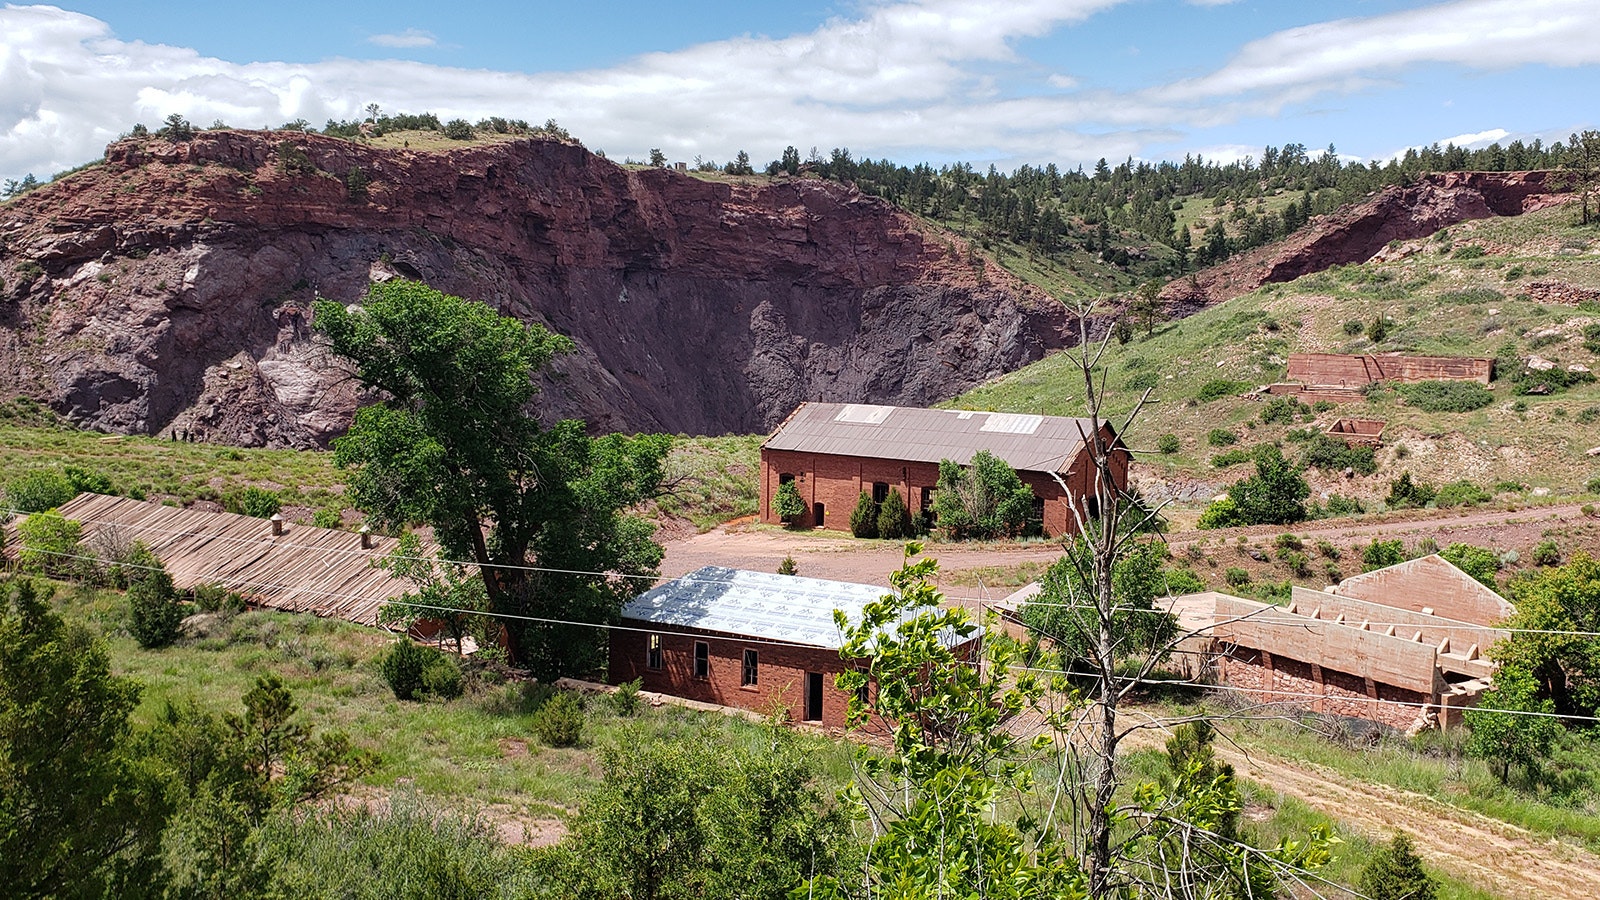 The brick mining facilities near the Sunrise Glory Hole are still intact, although the roofs are giving way to weather.